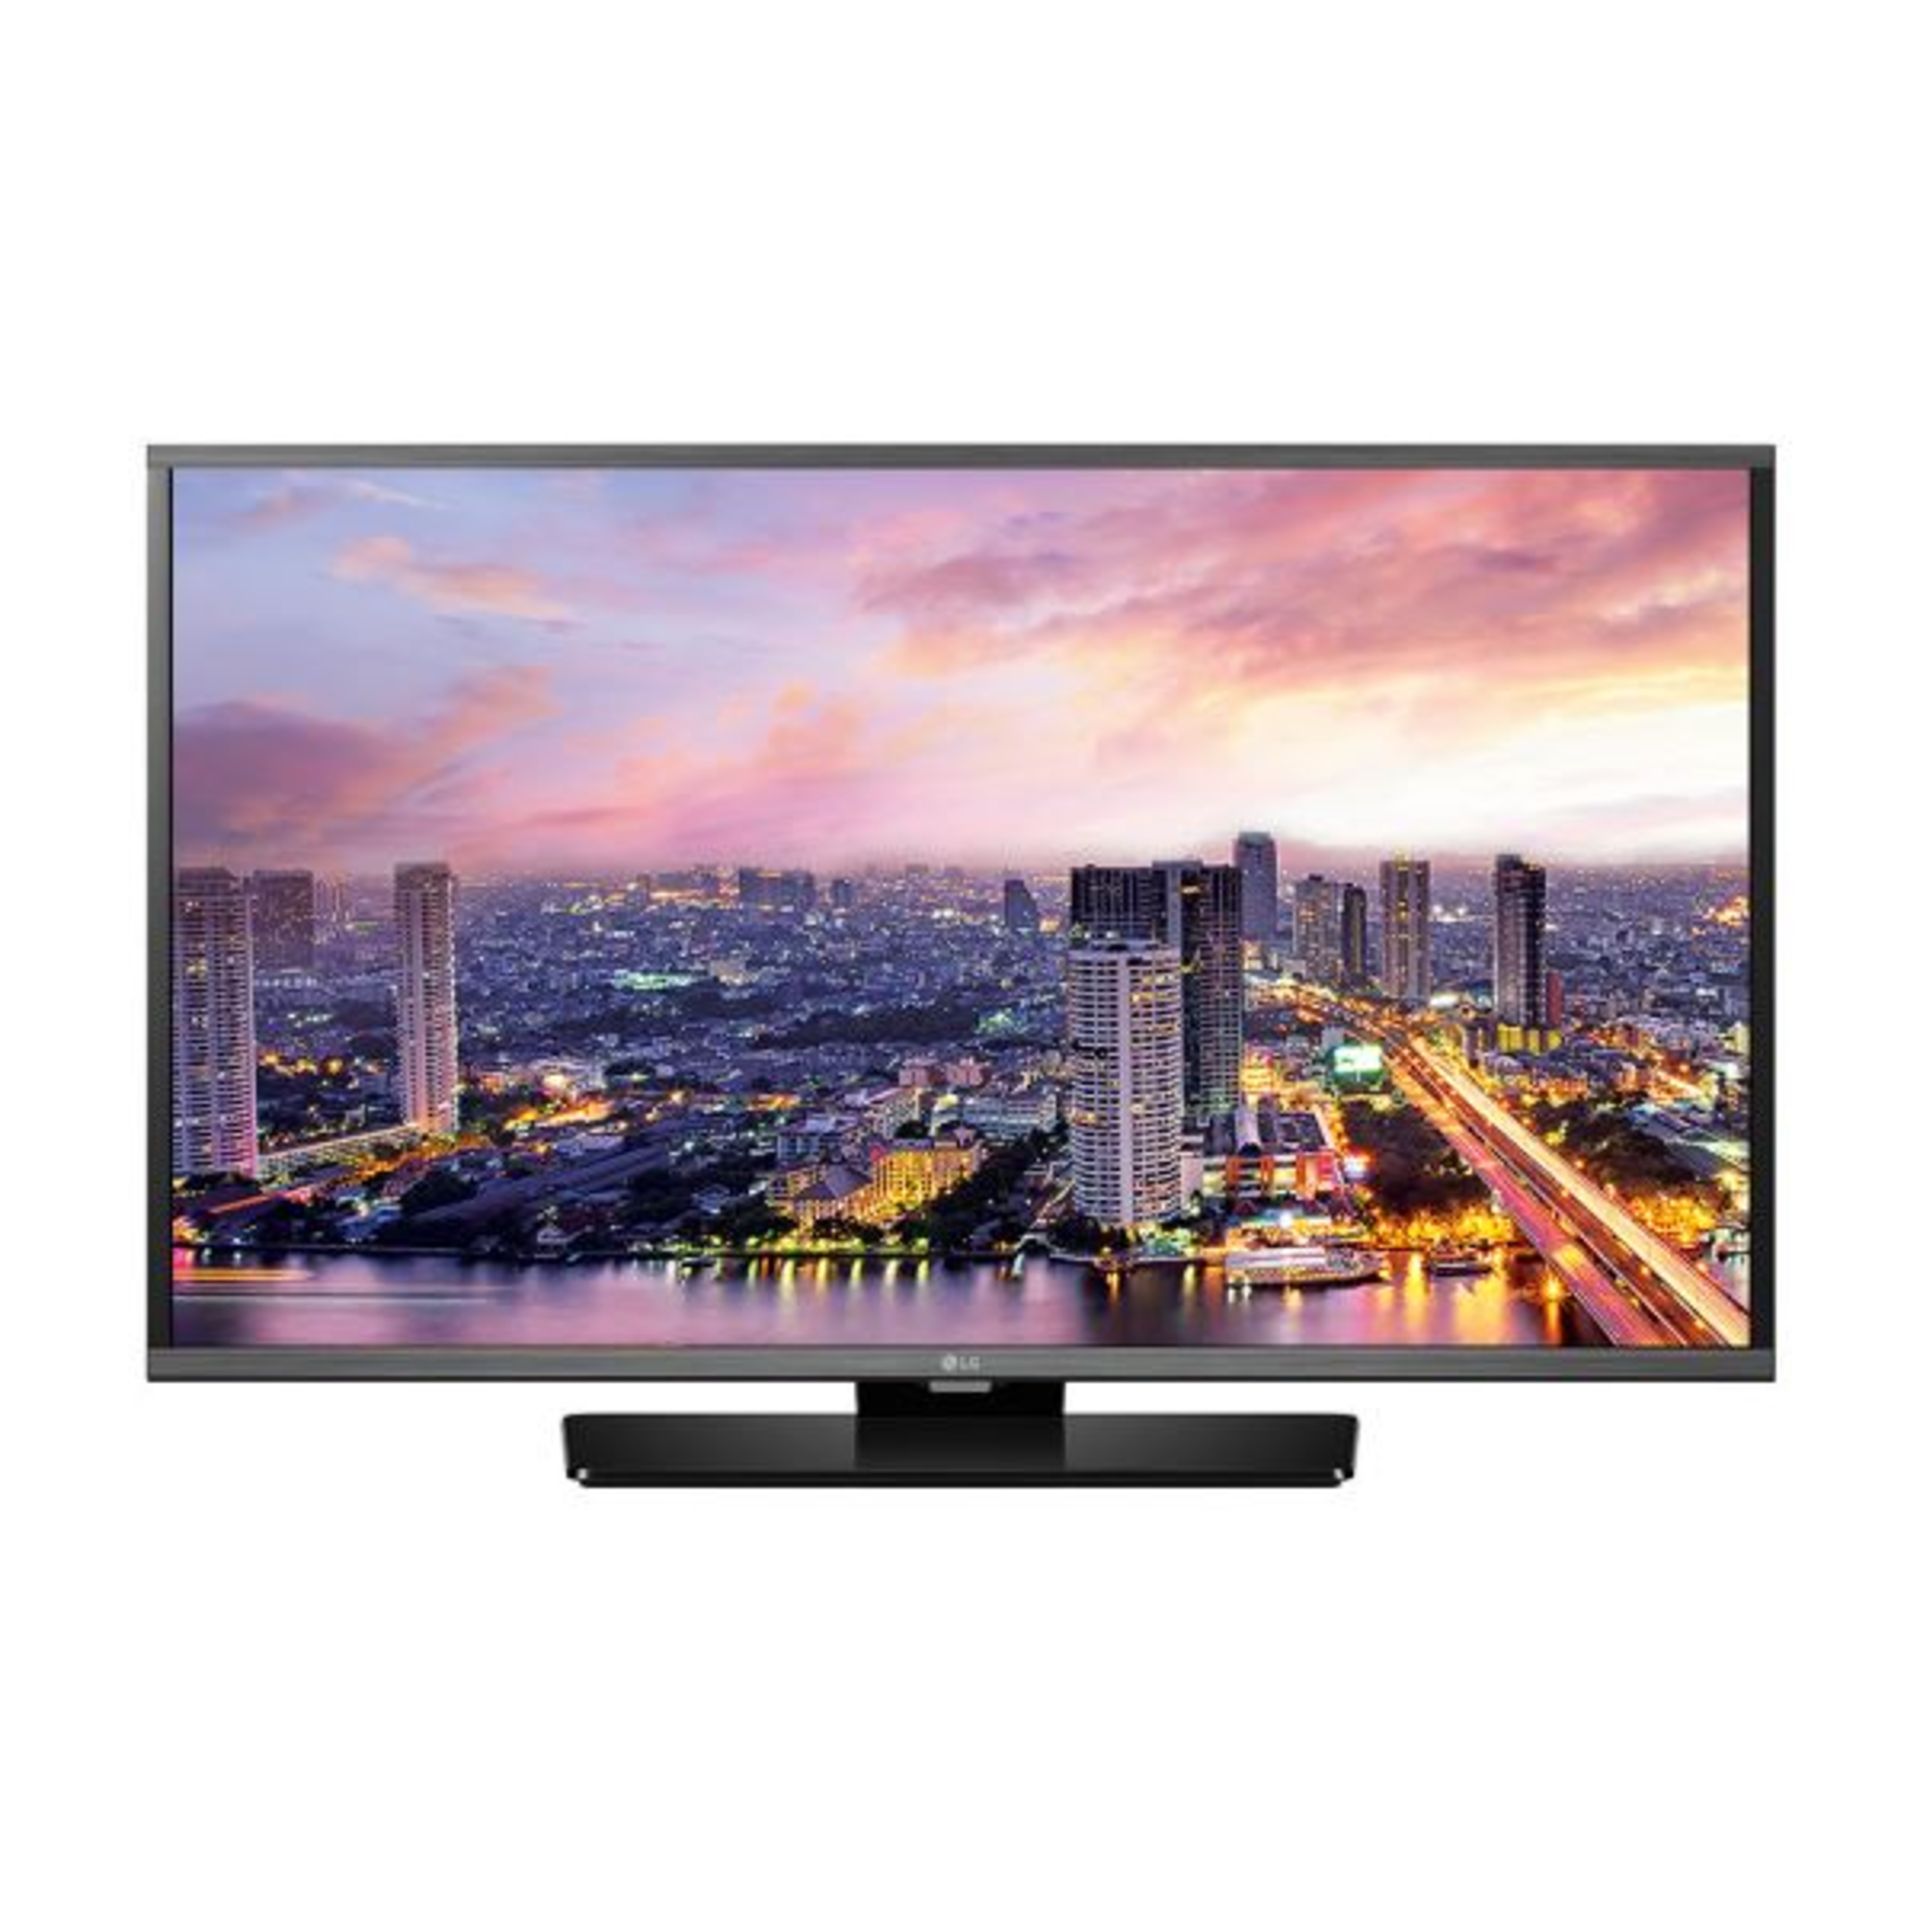 V Grade A LG 40 Inch FULL HD IPS LED MONITOR WITH SPEAKERS - HDMI, USB 40MB27HM-P